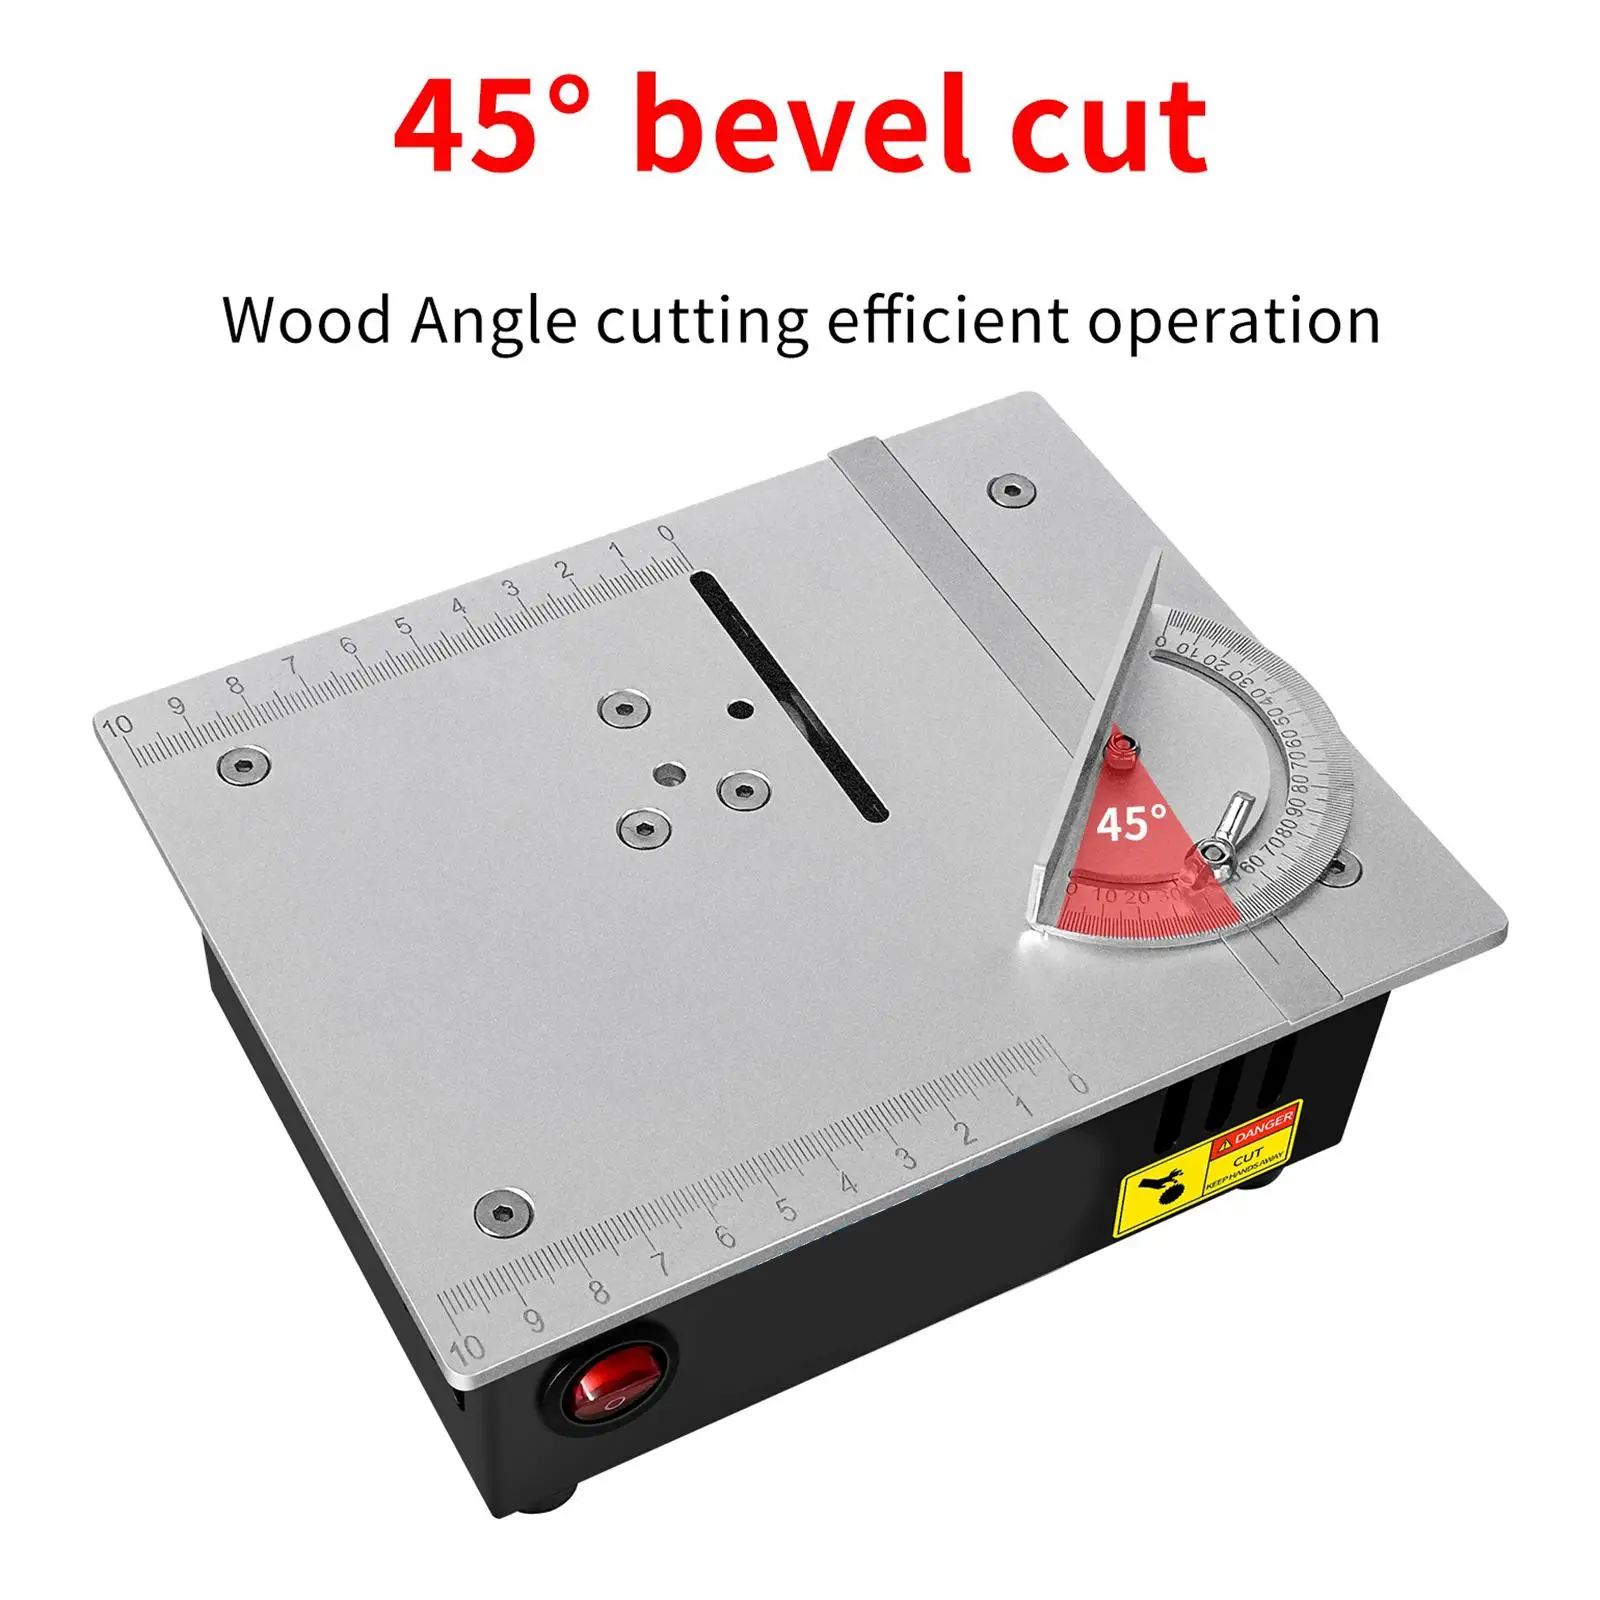 Mini Hobby Table Saw Multifunctional Table Saw Mini Desktop Electric Saw for DIY Crafts Small Woodworking Projects Model Making